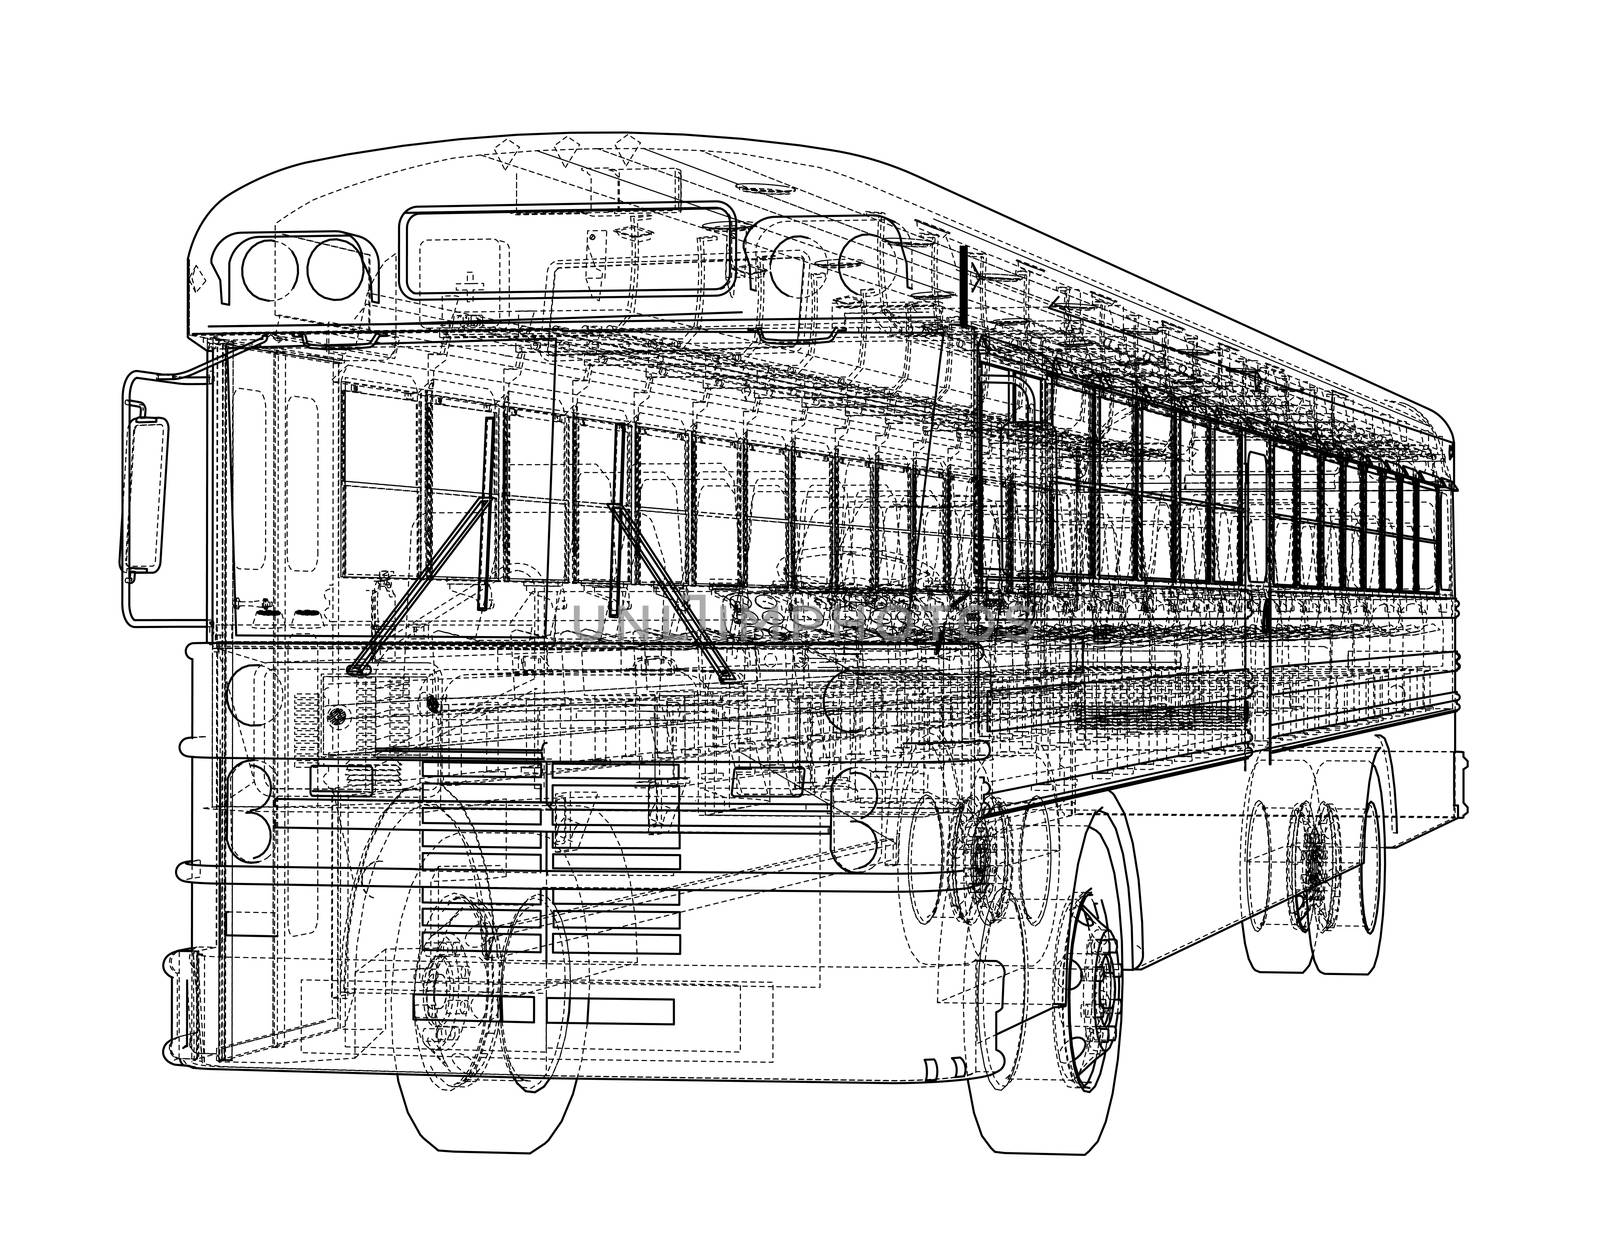 School bus outline by cherezoff